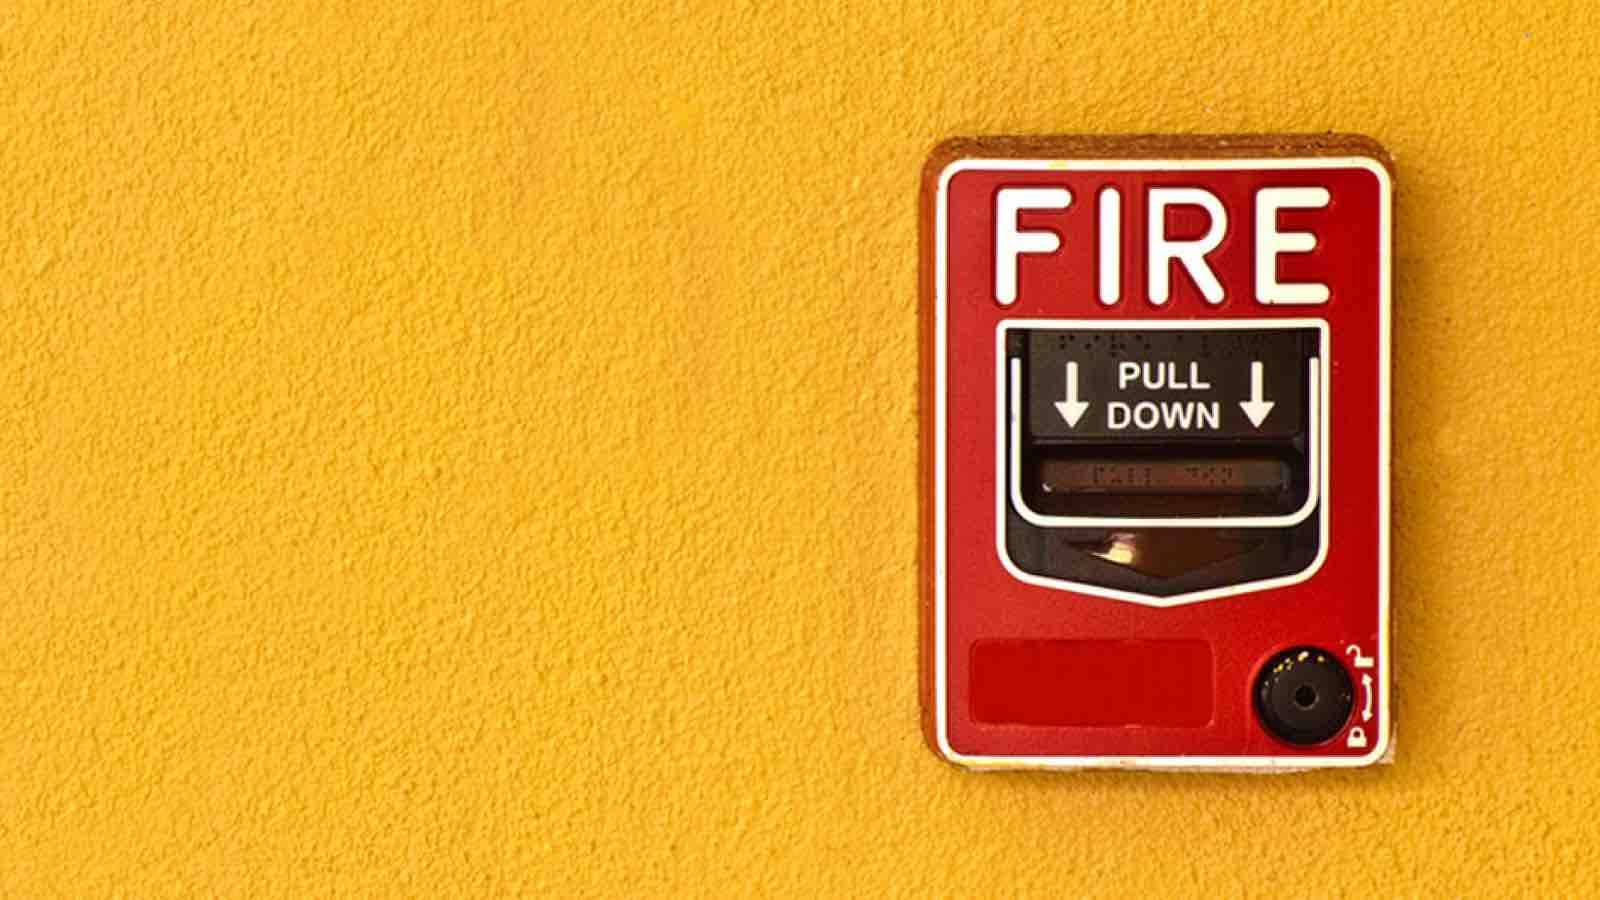 Fire alarm on a yellow wall